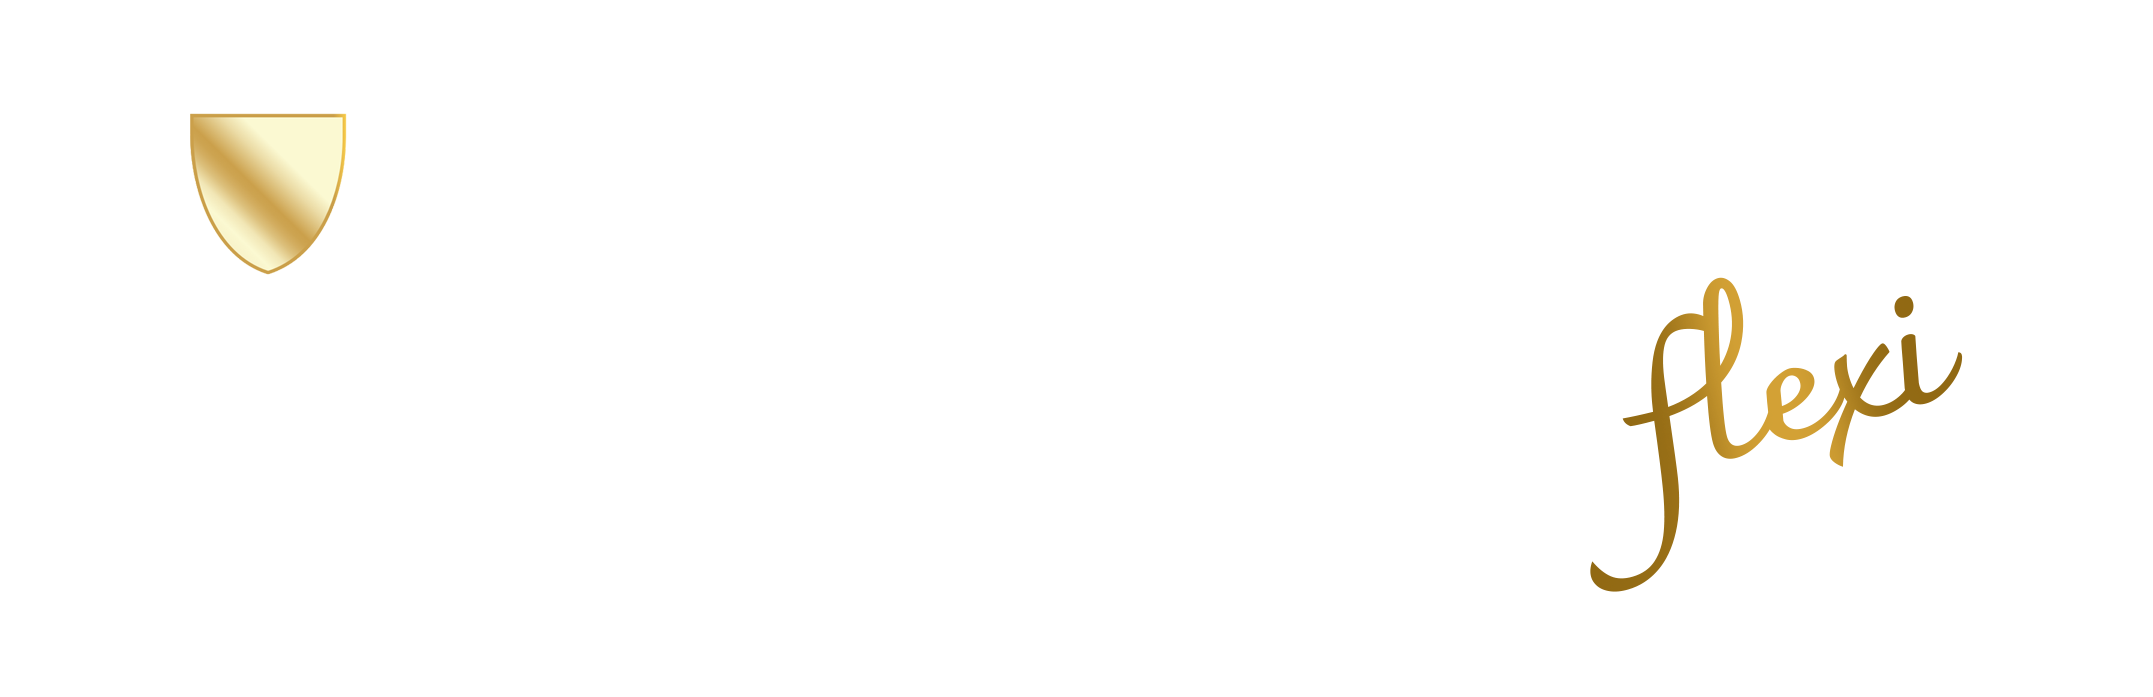 leisure guard travel insurance number